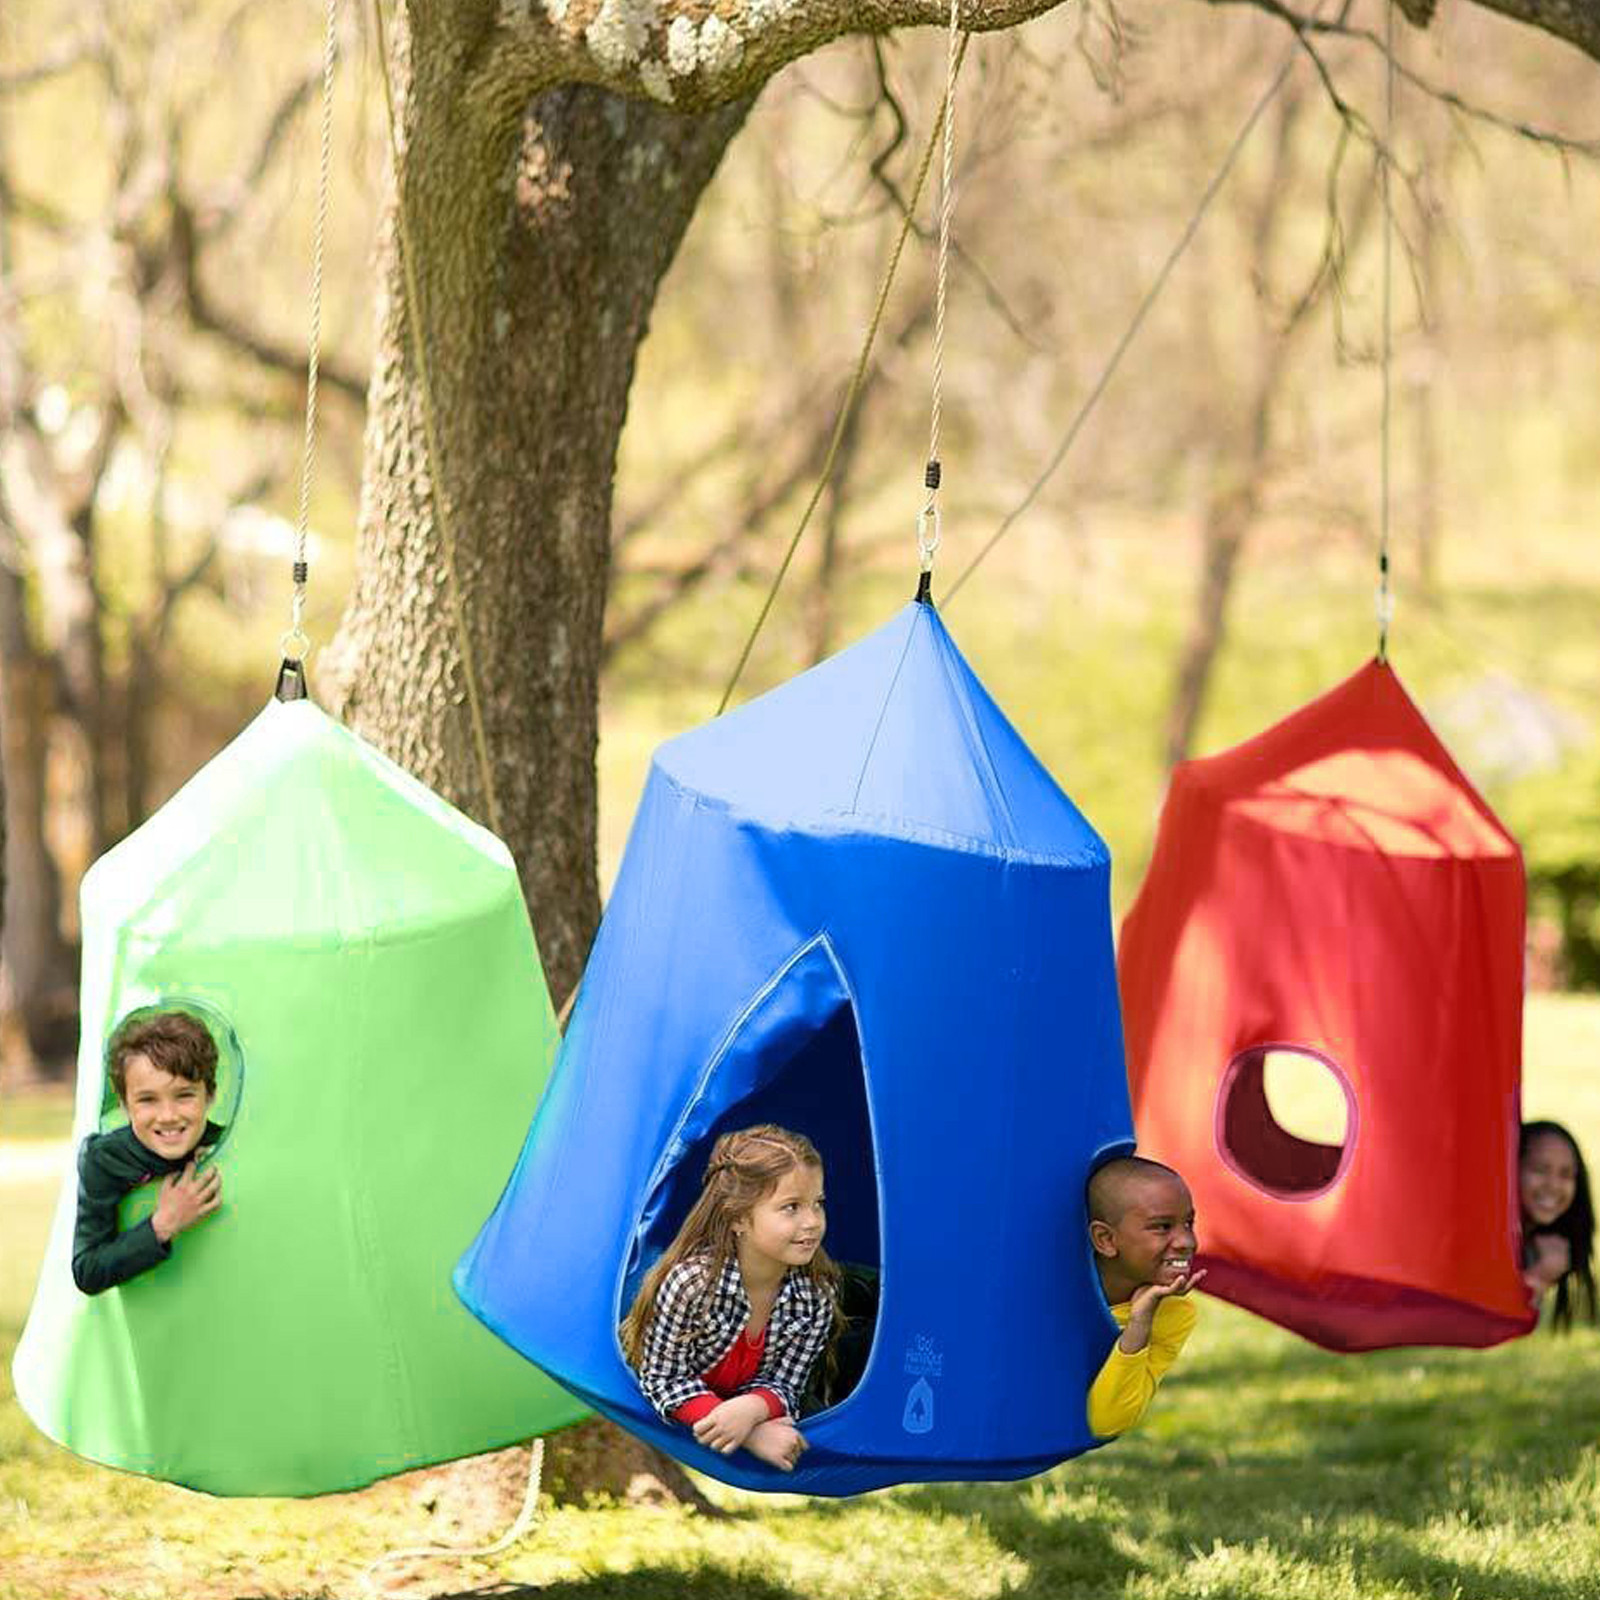 Hanging Tree Tent Waterproof Swing Play House Portable Hammock Chair with LED US 